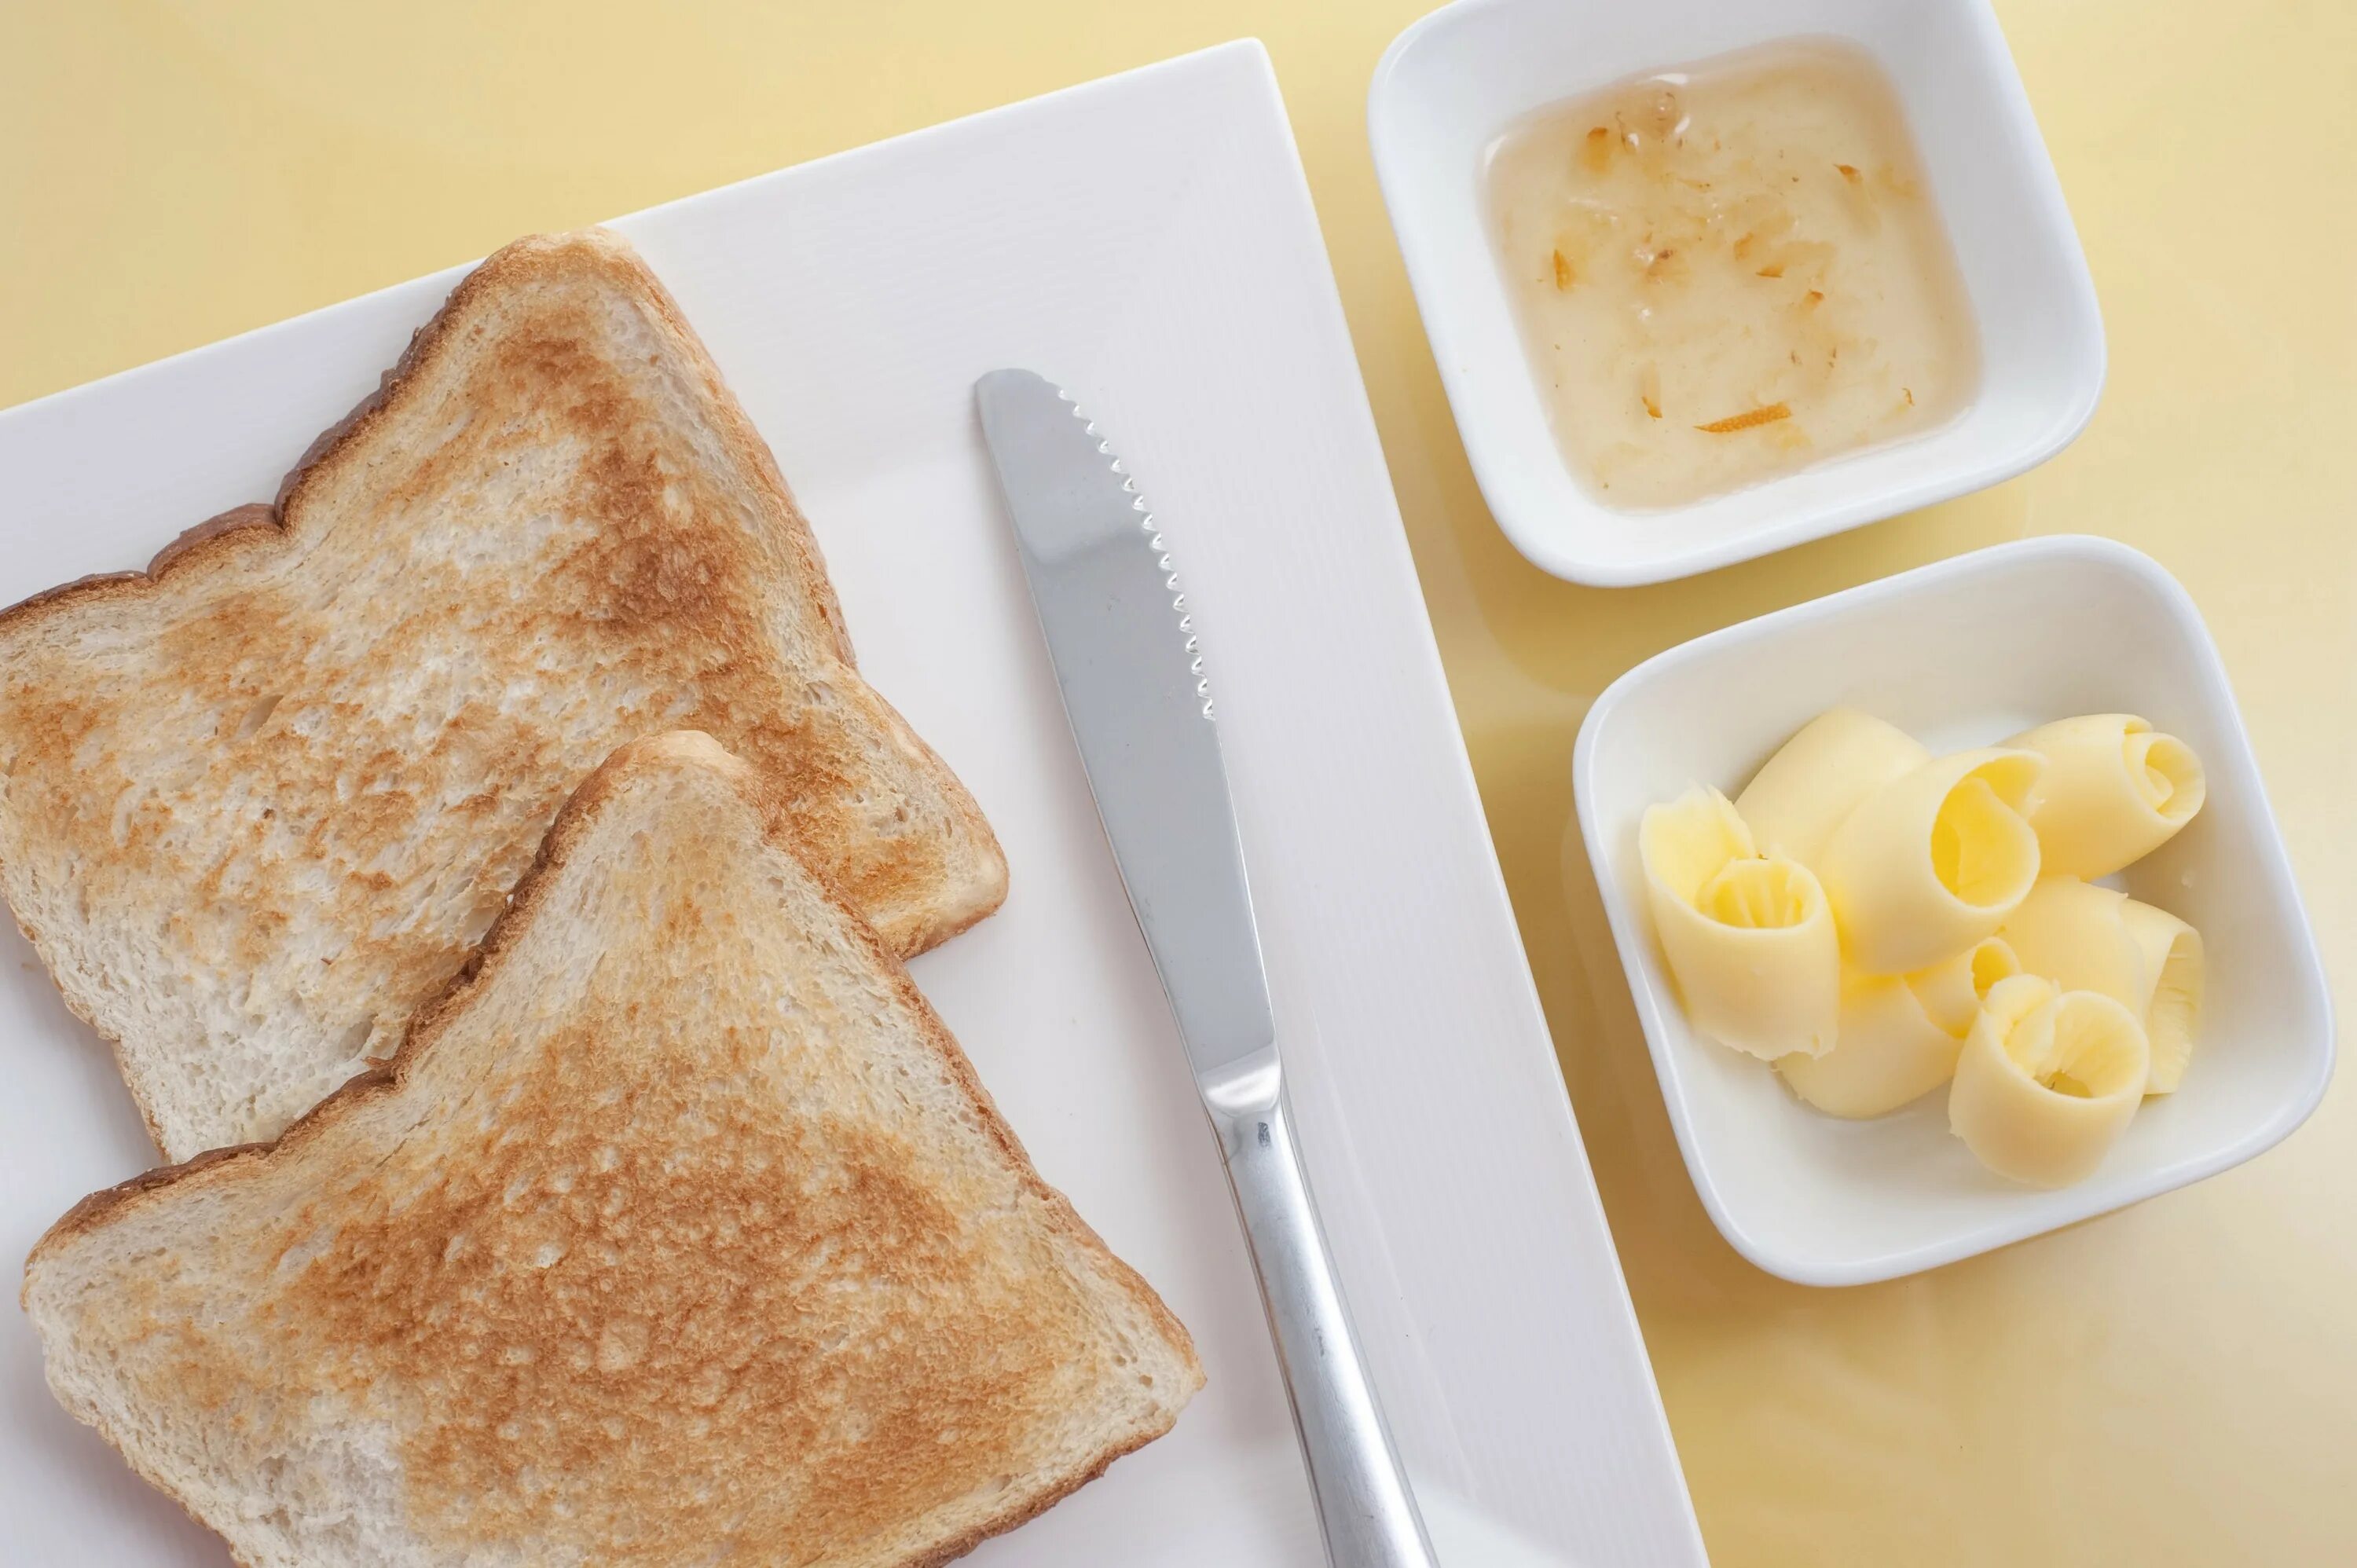 Bread and Butter Plates. Toast Lands Butter Side down. Breakfast Butter. Toast Plate. Сливочное масло на завтрак